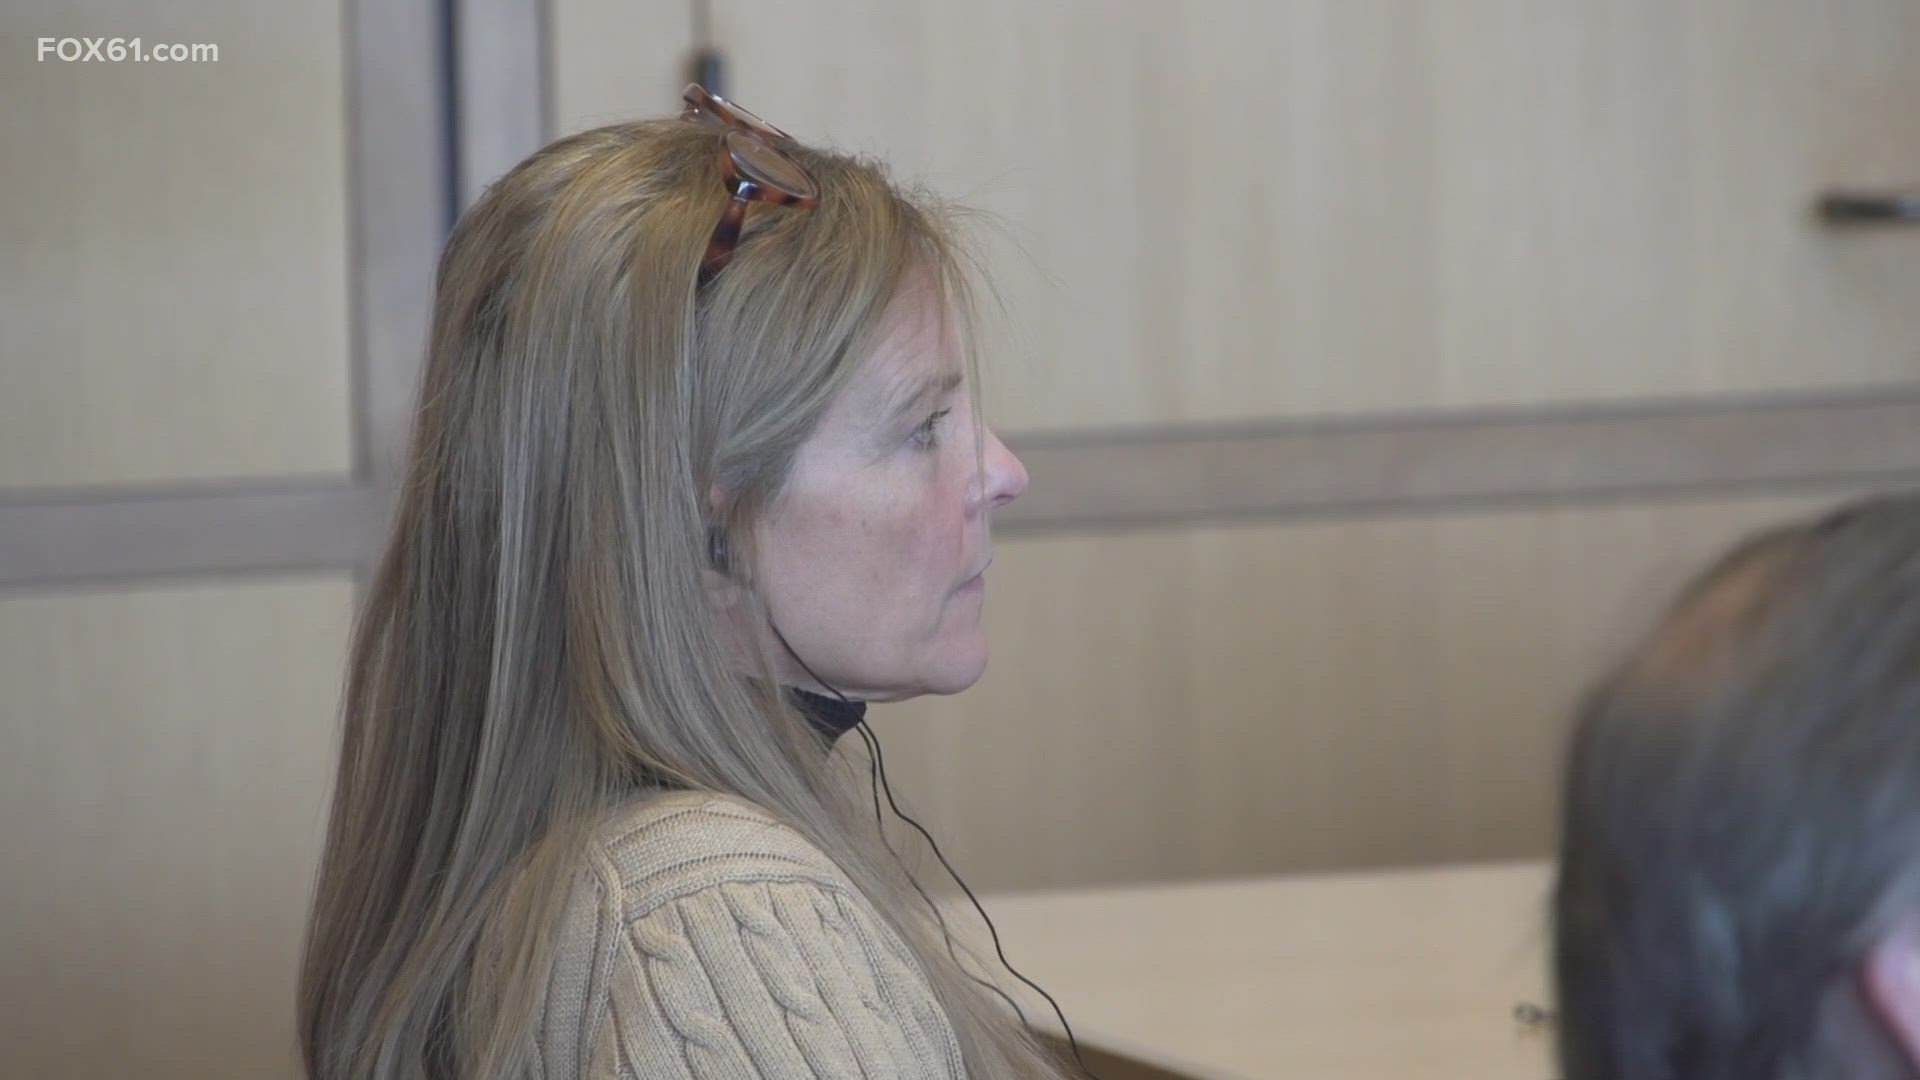 Thursday’s testimony recounted the days of May 24 and May 25, 2019, to the court, the first 24 hours of the search for Jennifer Dulos.